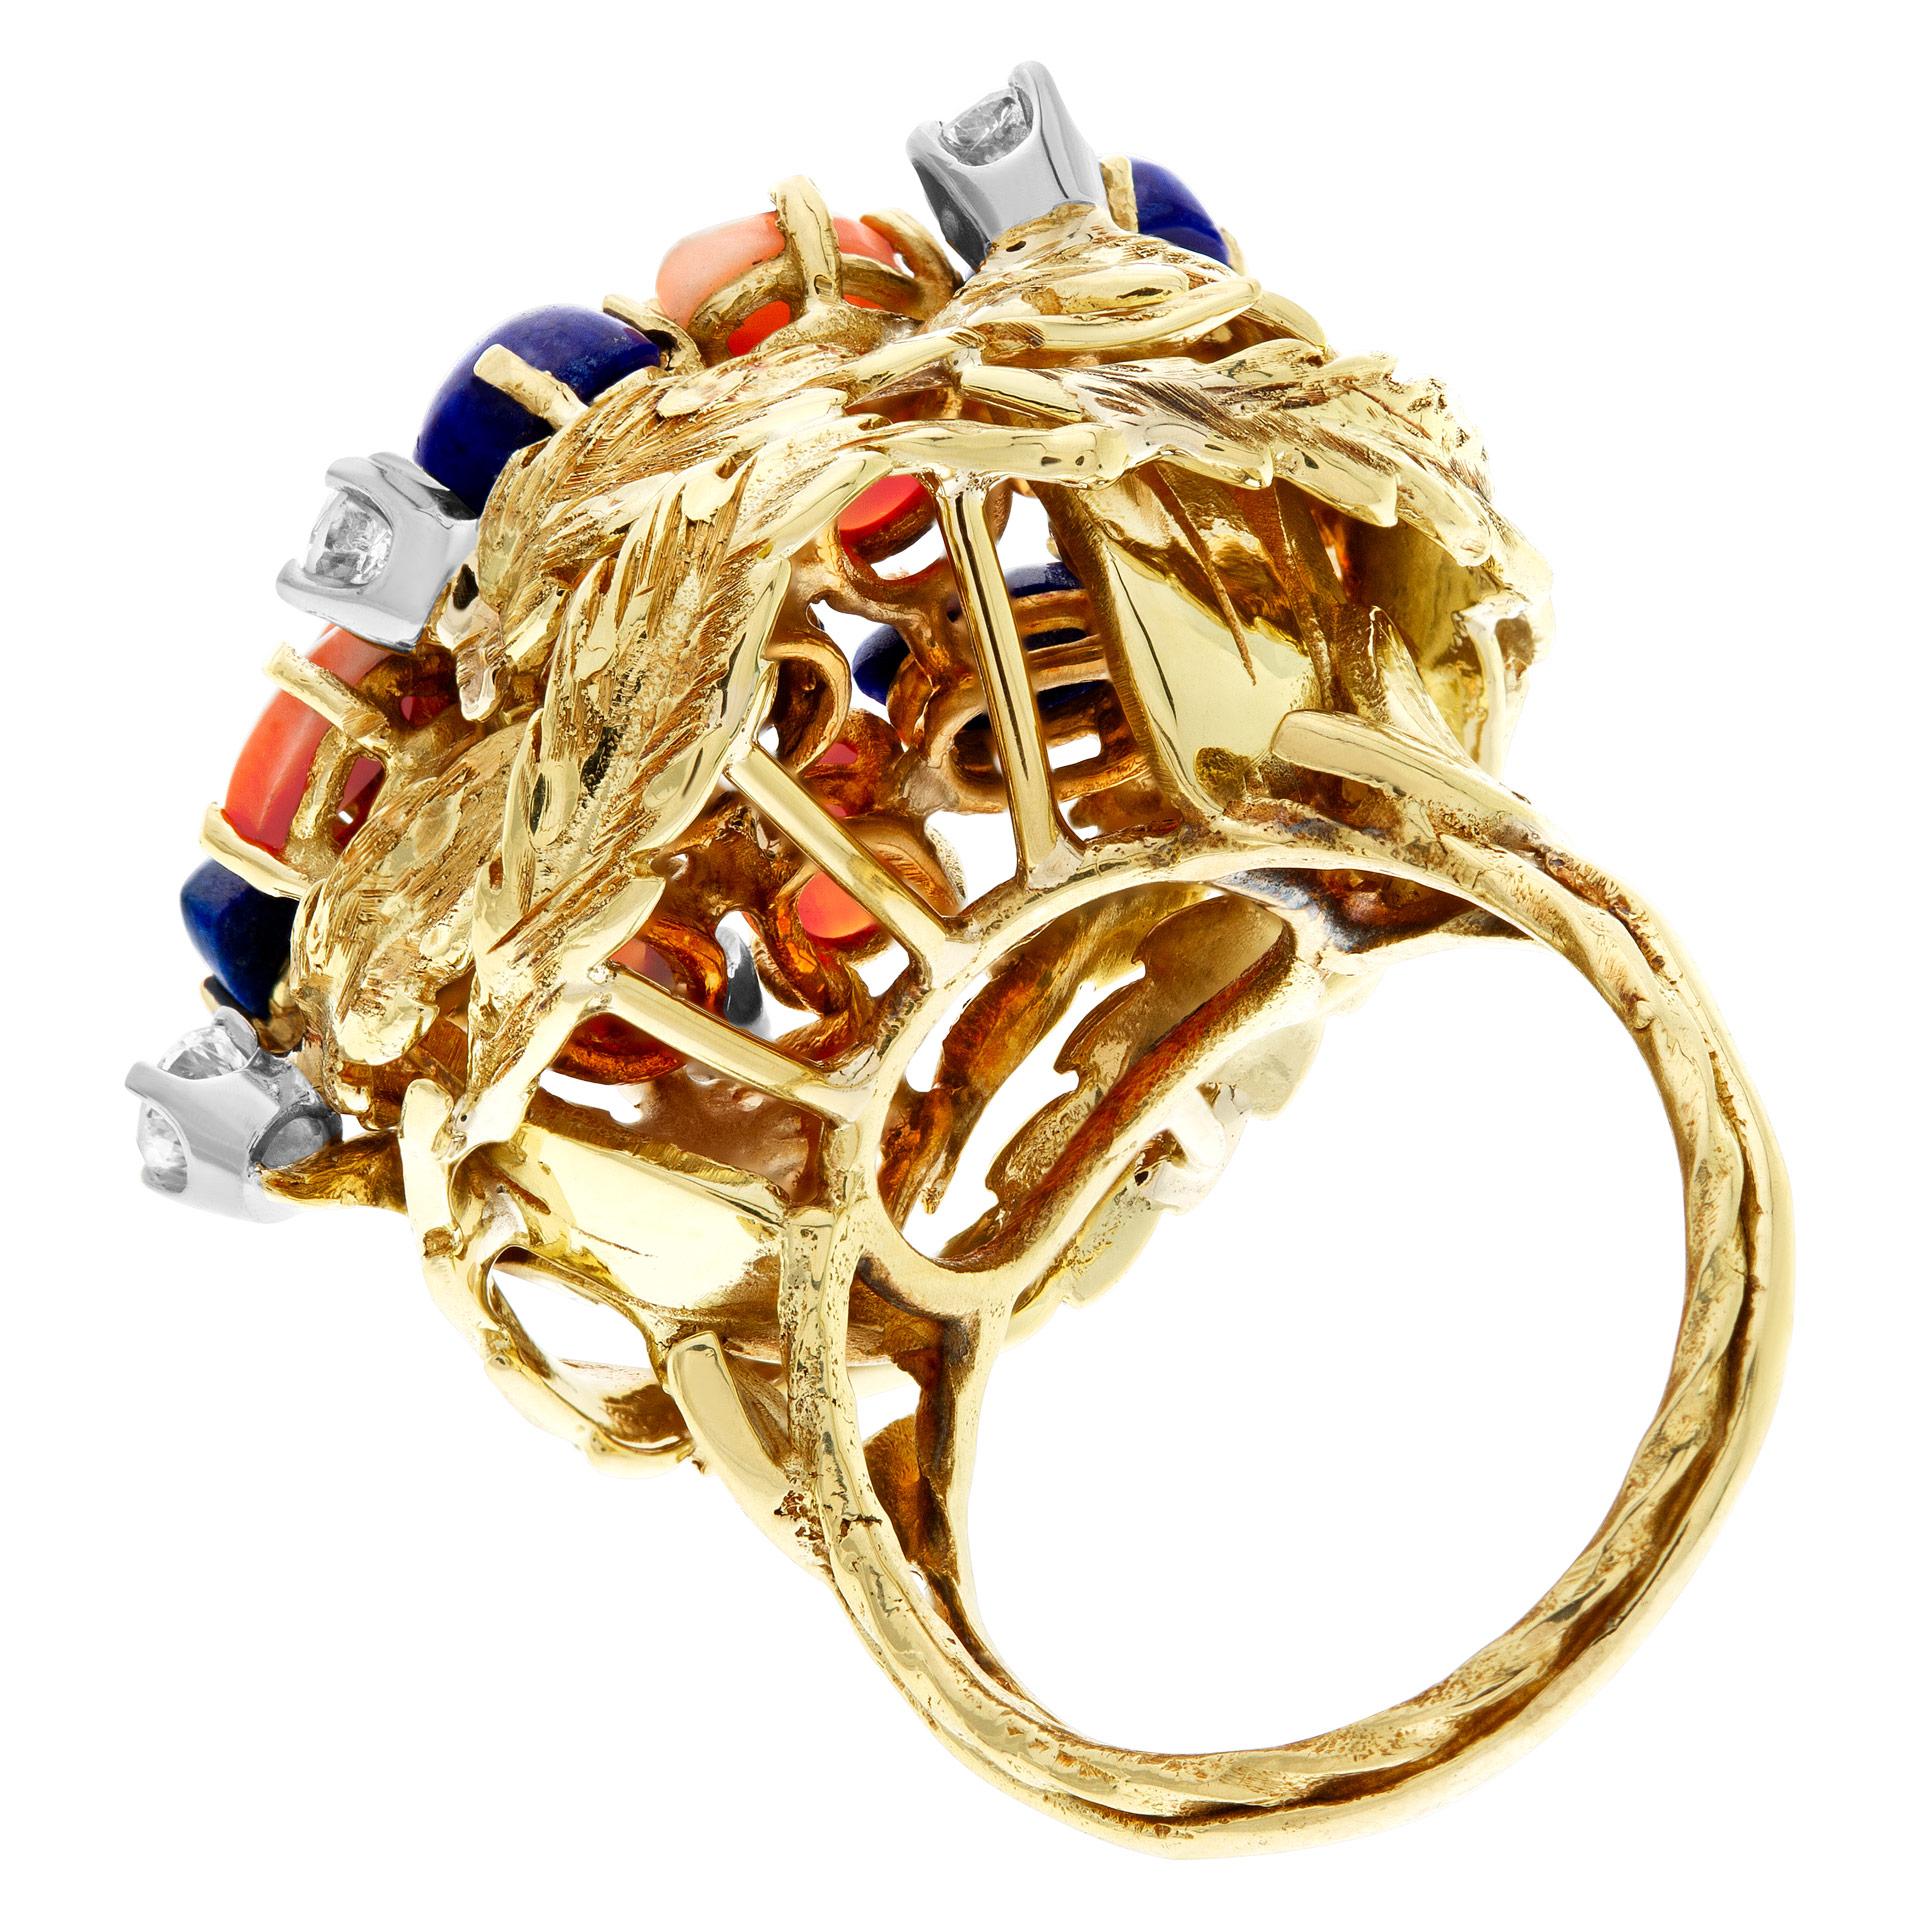 Women's or Men's Lapiz Lazuli & Coral Garden Ring in 18k Yellow Gold with Diamond Accents For Sale